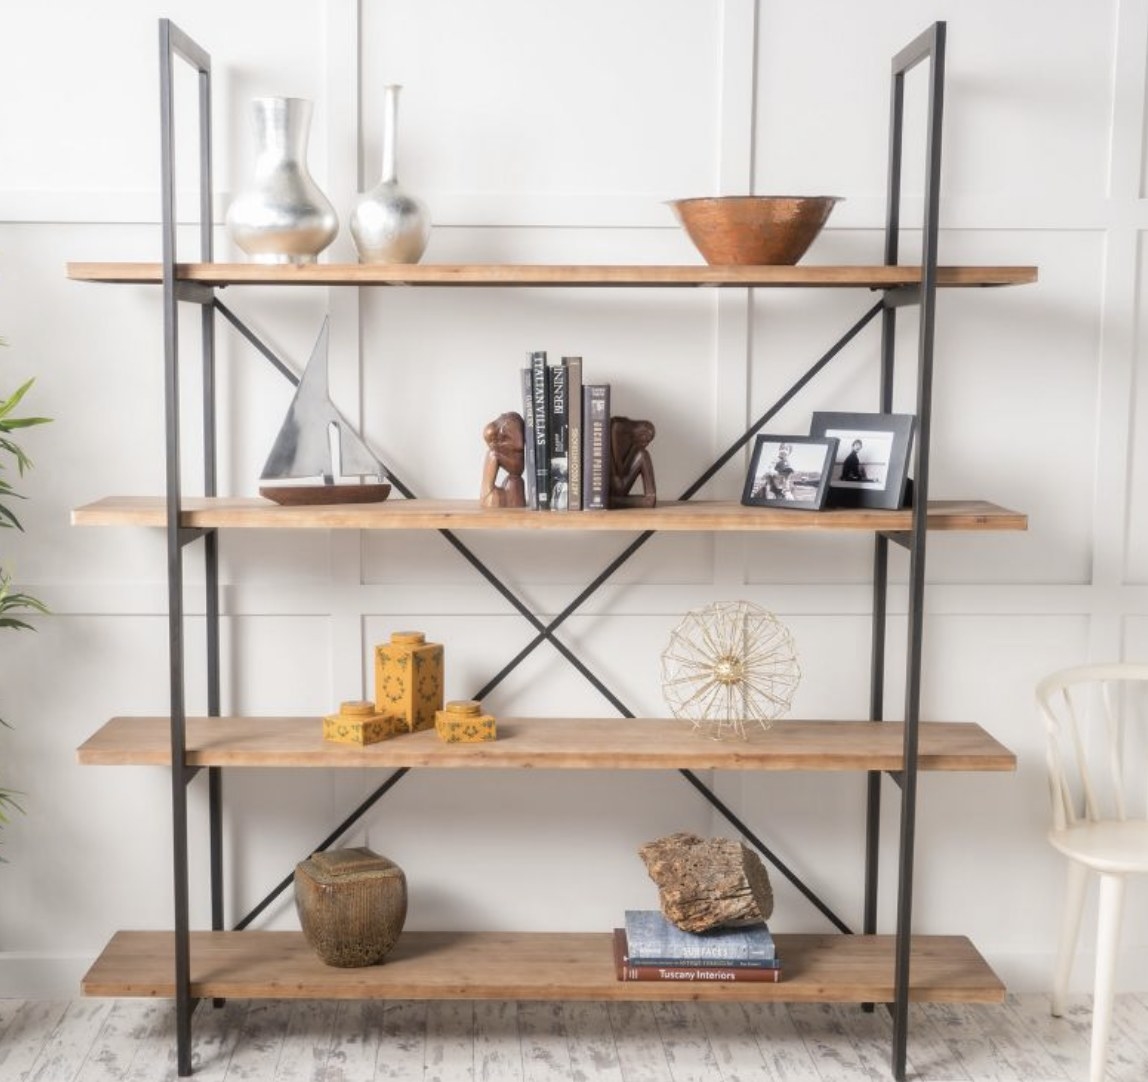 A wooden bookcase